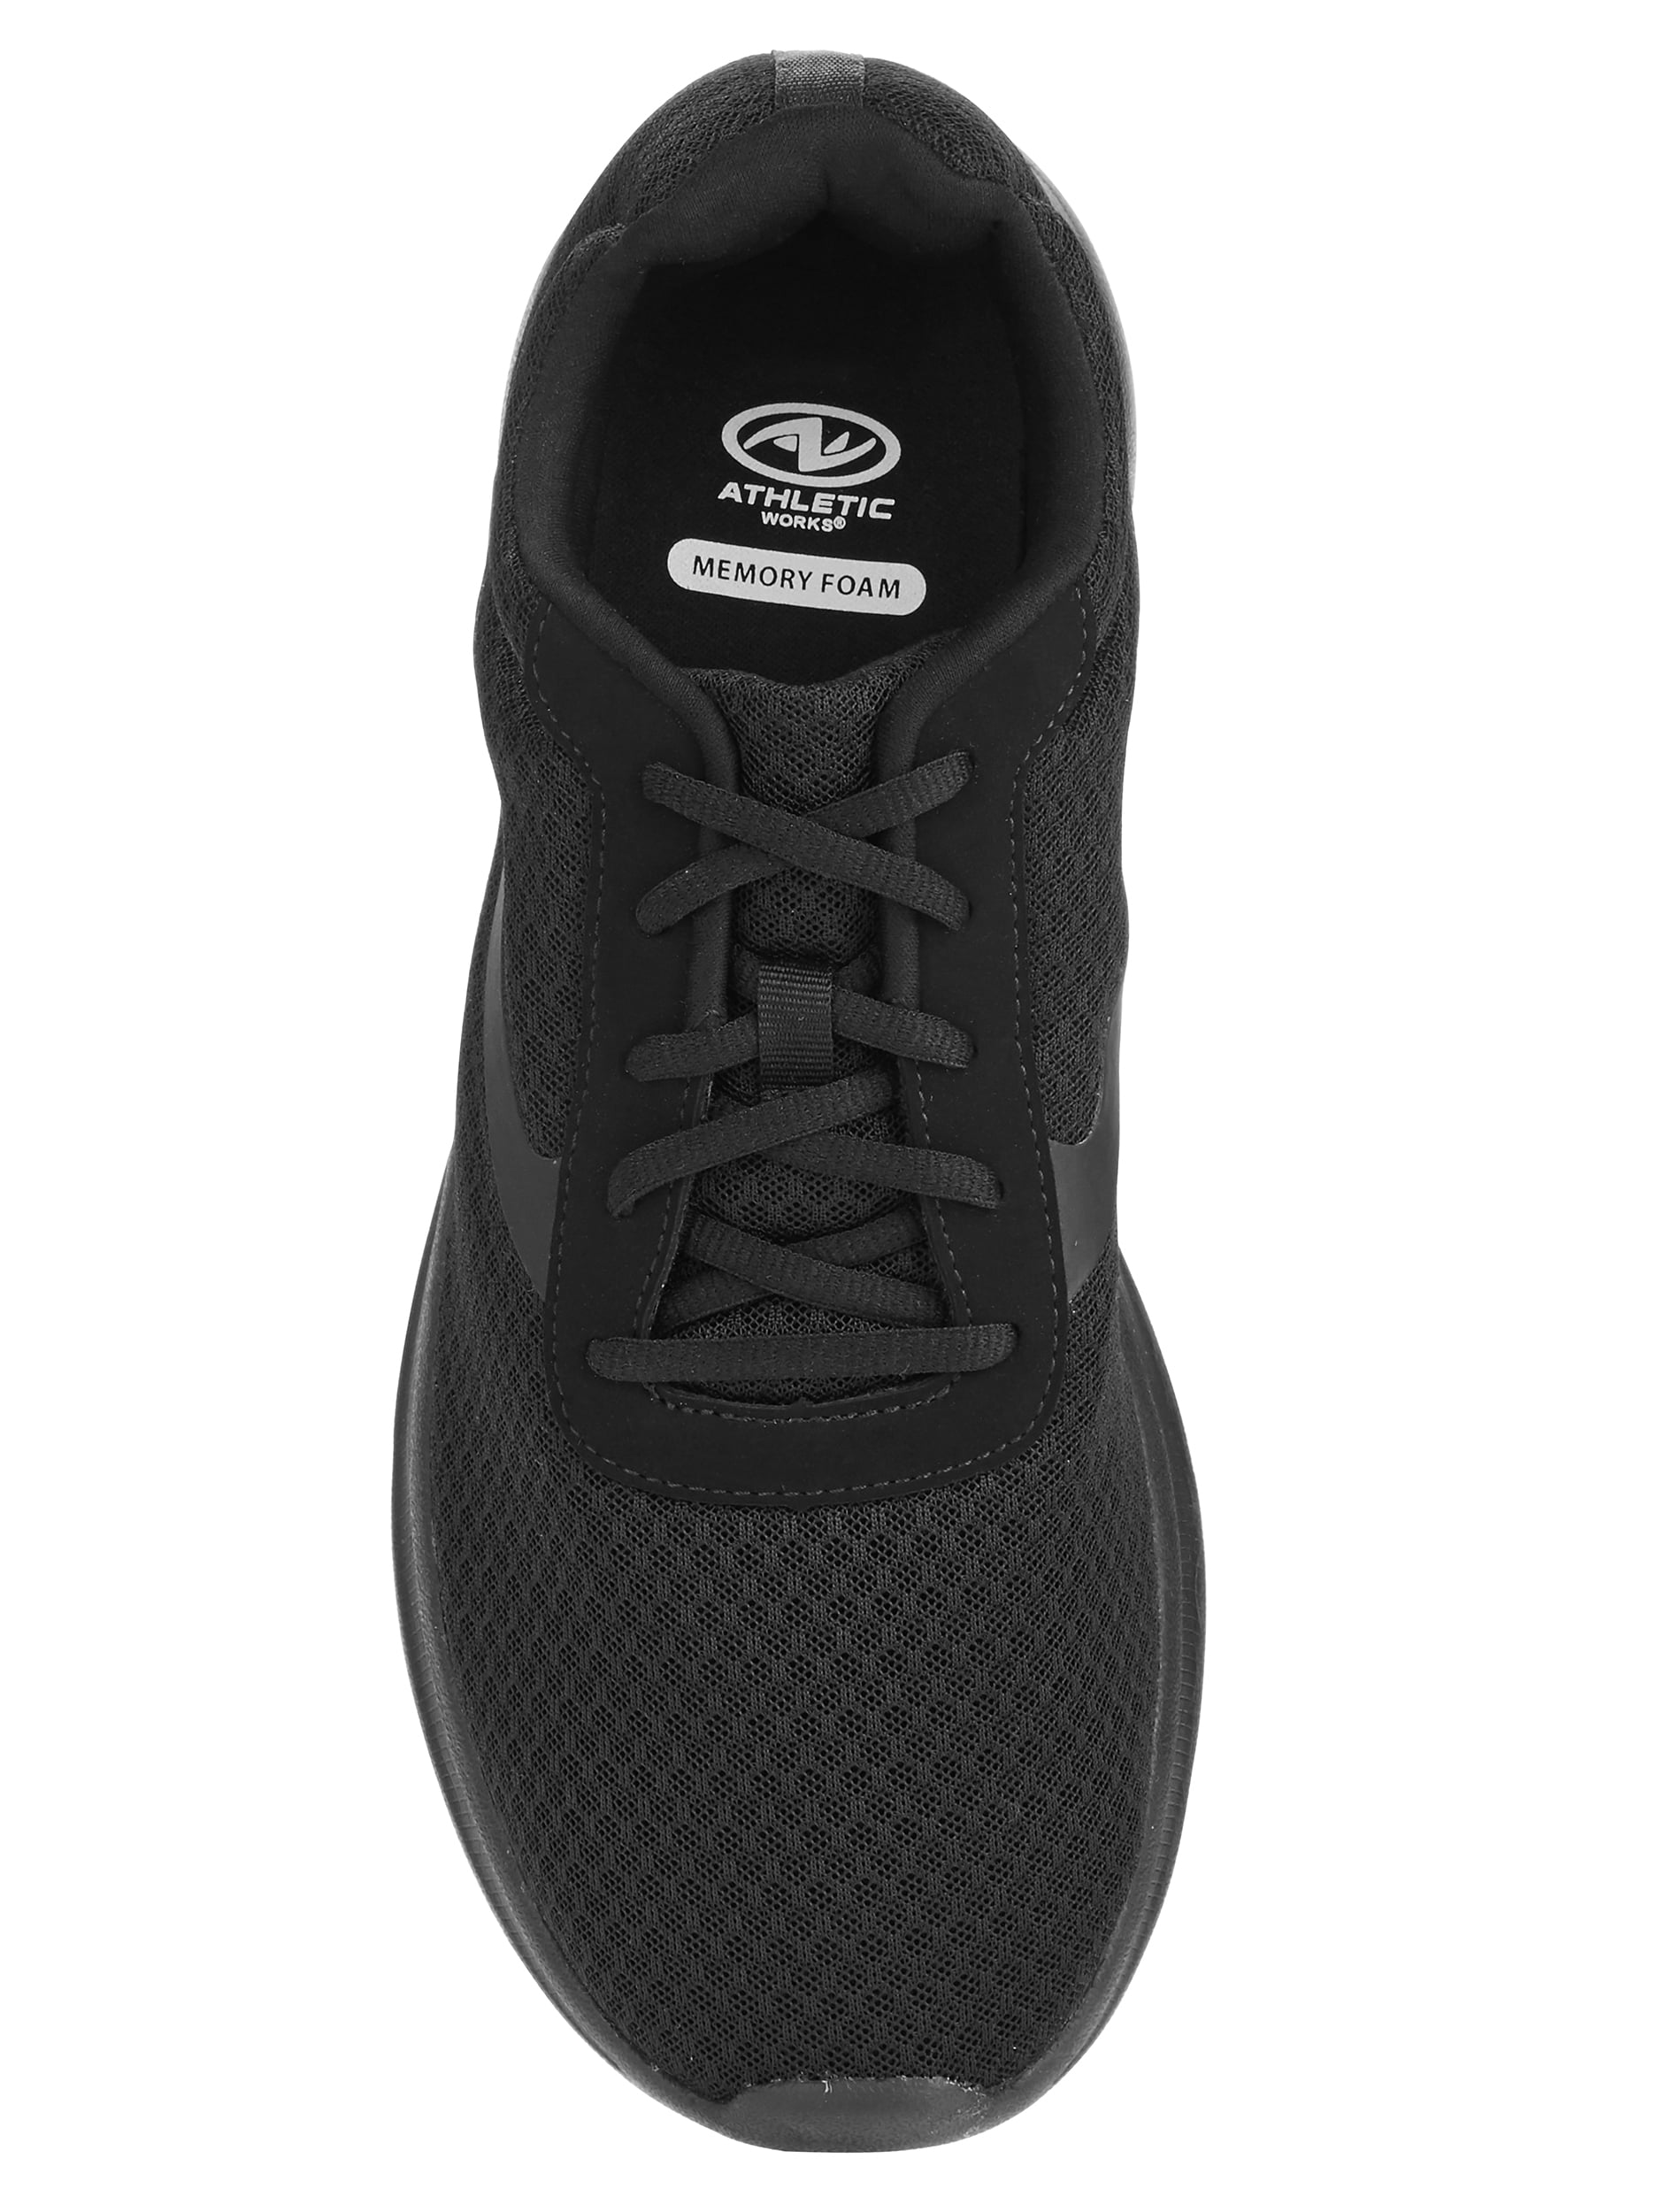 athletic works shoes memory foam